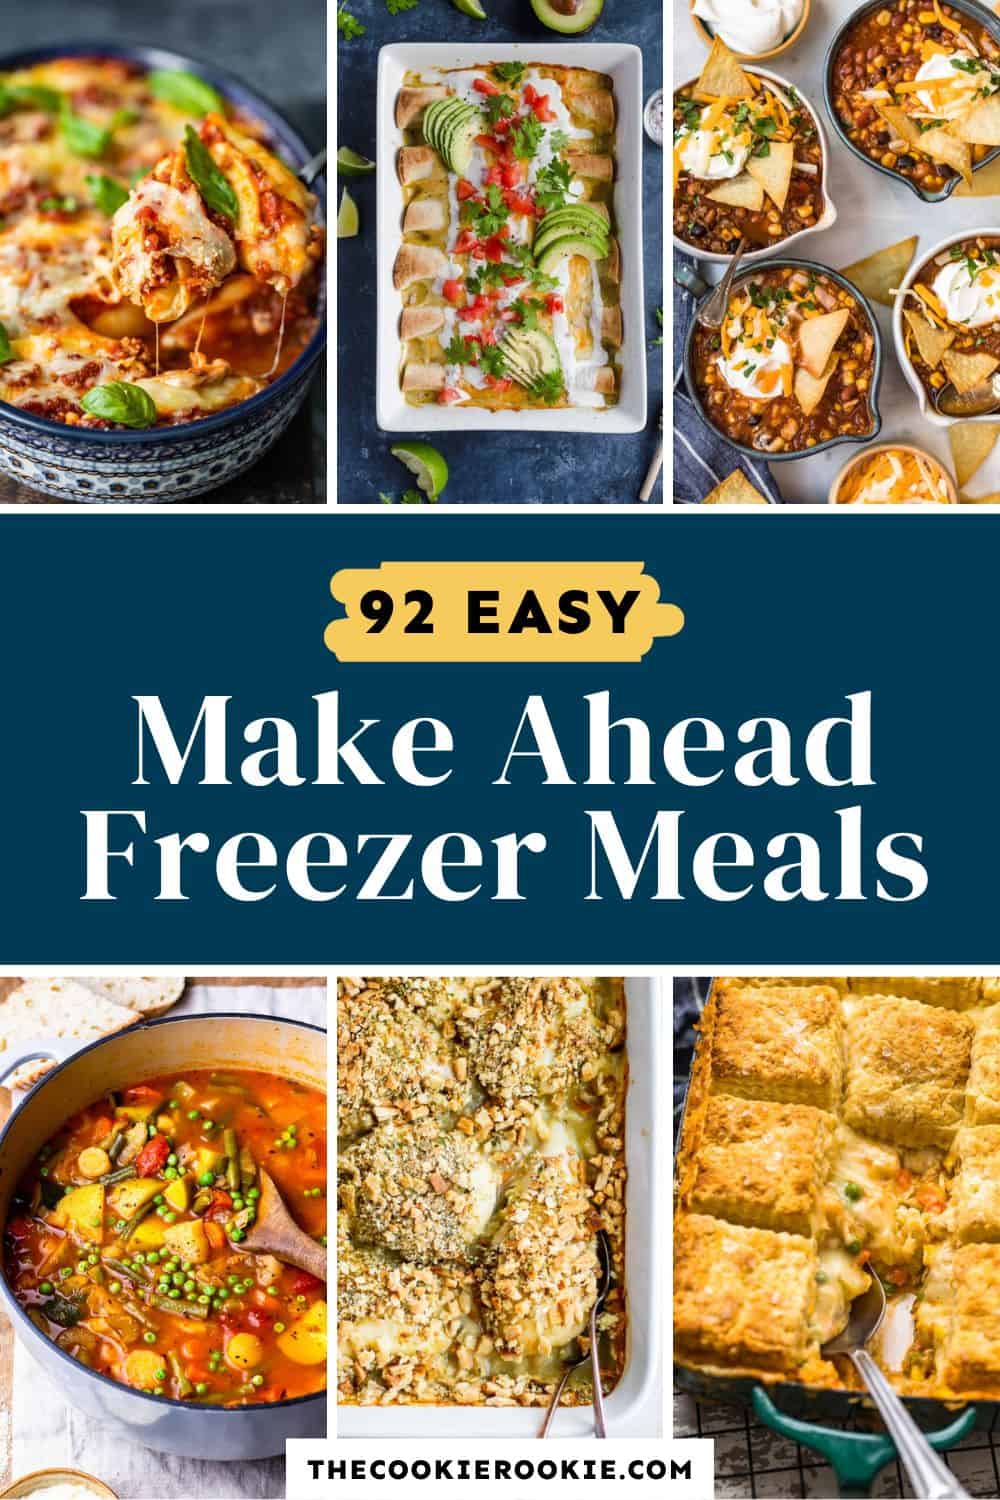 92+ Easy Freezer Meals to Make Ahead of Time - The Cookie Rookie®